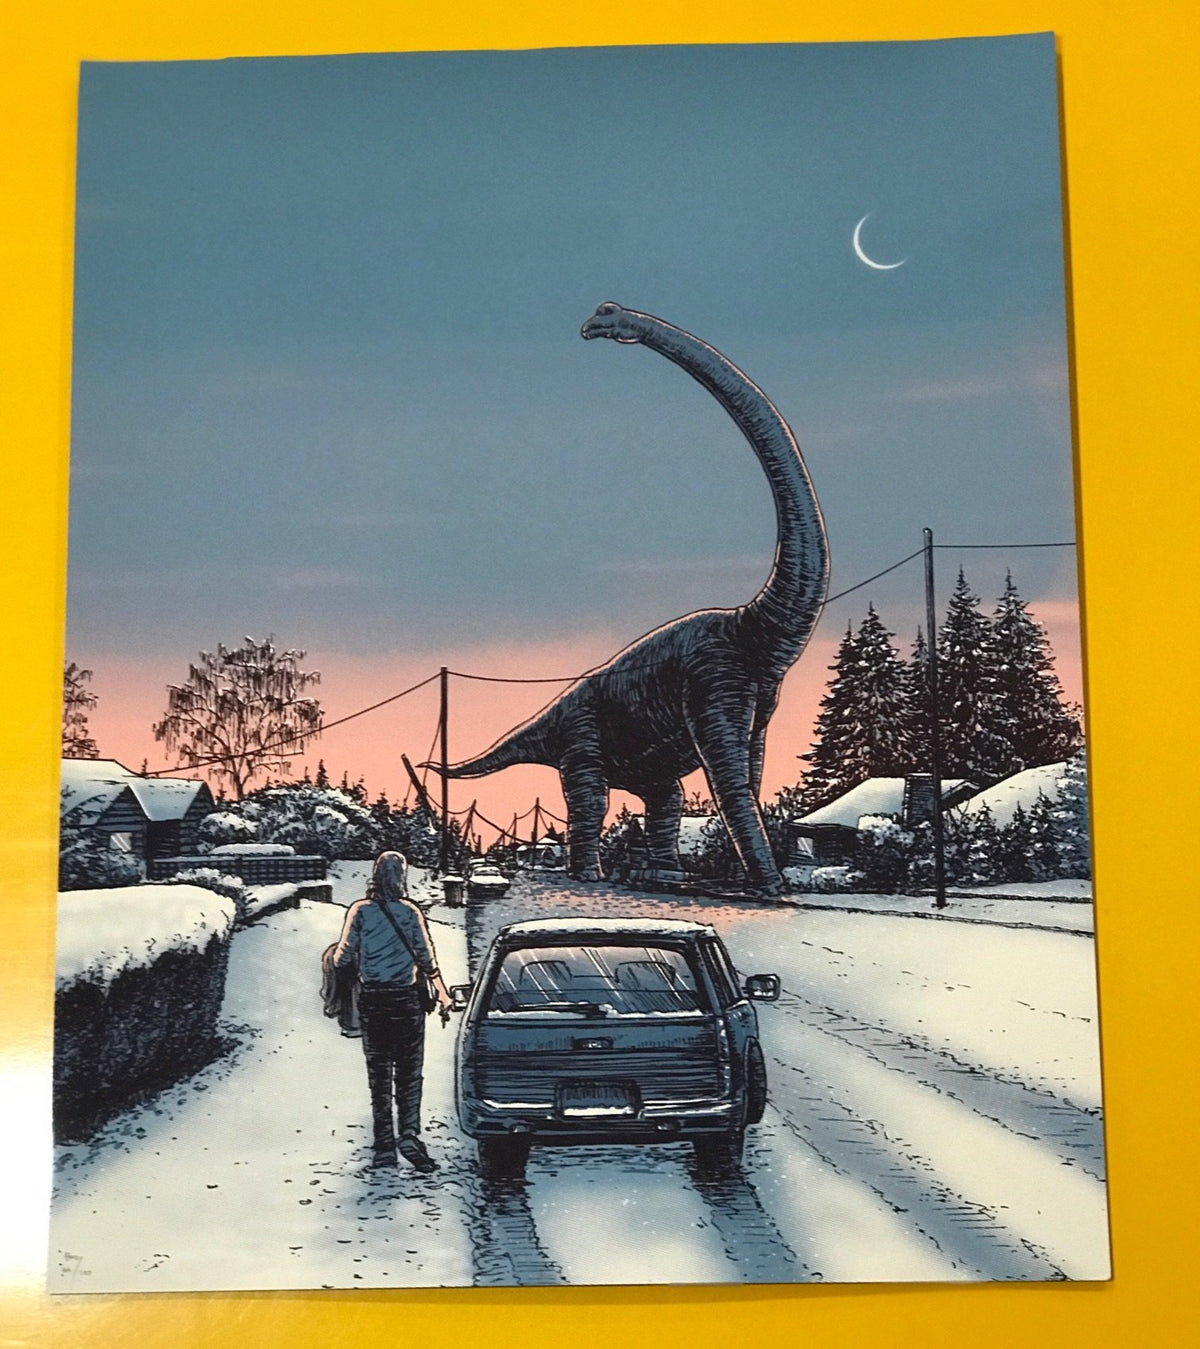 A person stands by their stopped car, while a longnecked dinosaur crossed the road. The road, houses and surrounding trees are covered with snow. There is a crescent moon in the blue night sky and a pink haze near the bottom as the sun goes down.